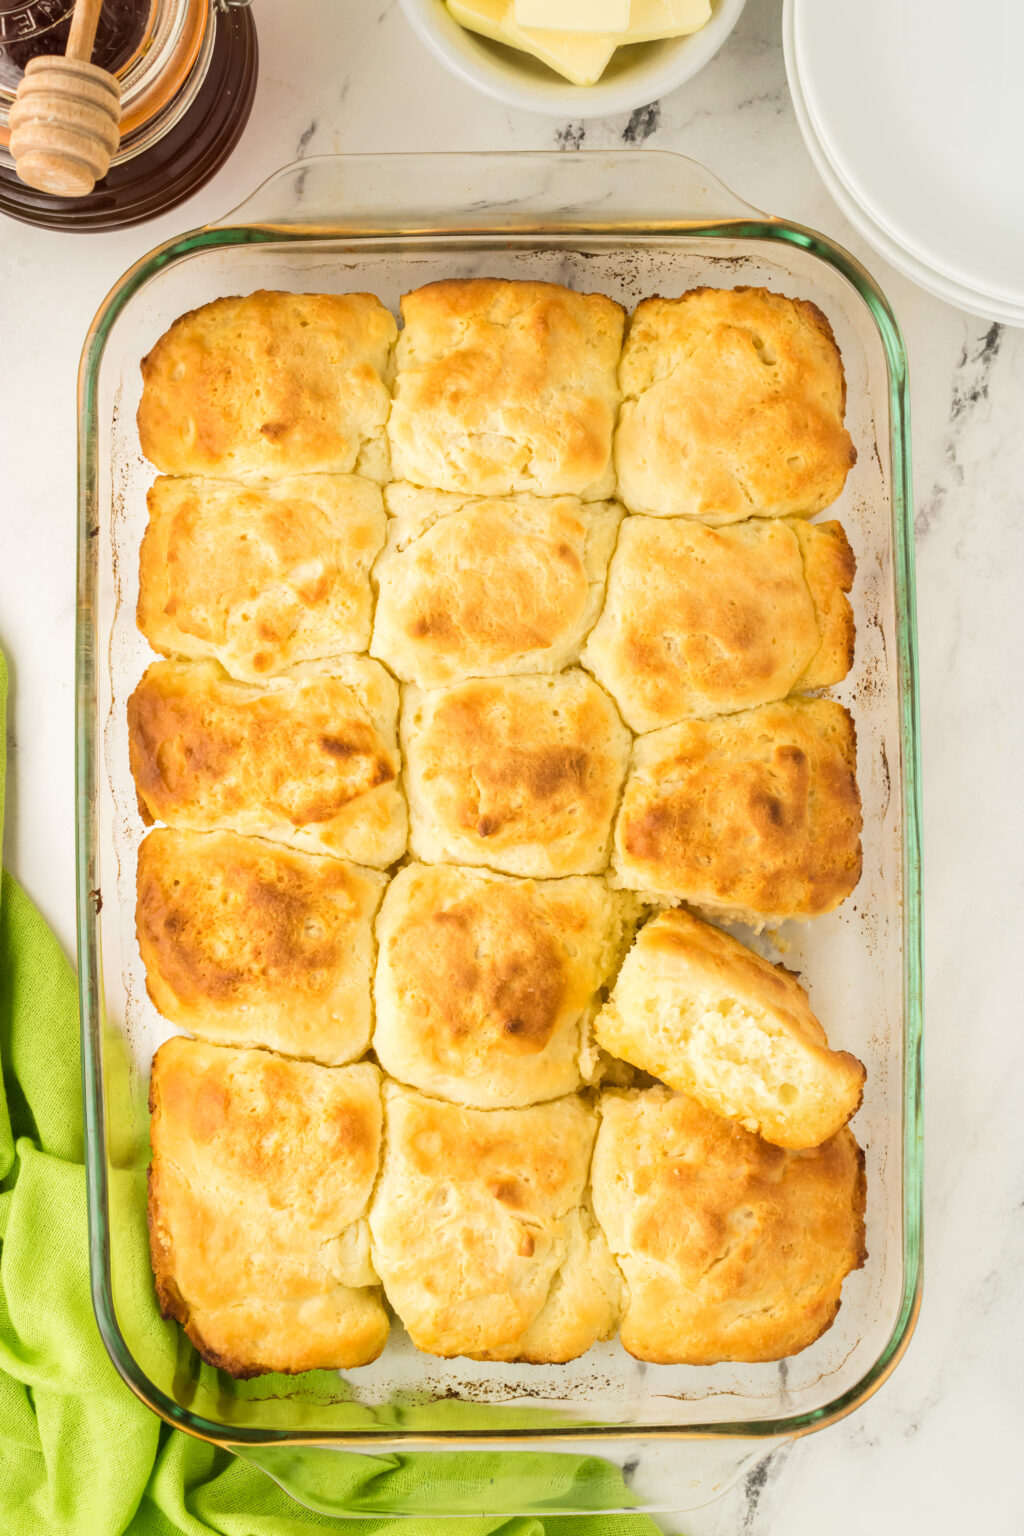 mountain dew biscuits in a glass baking dish